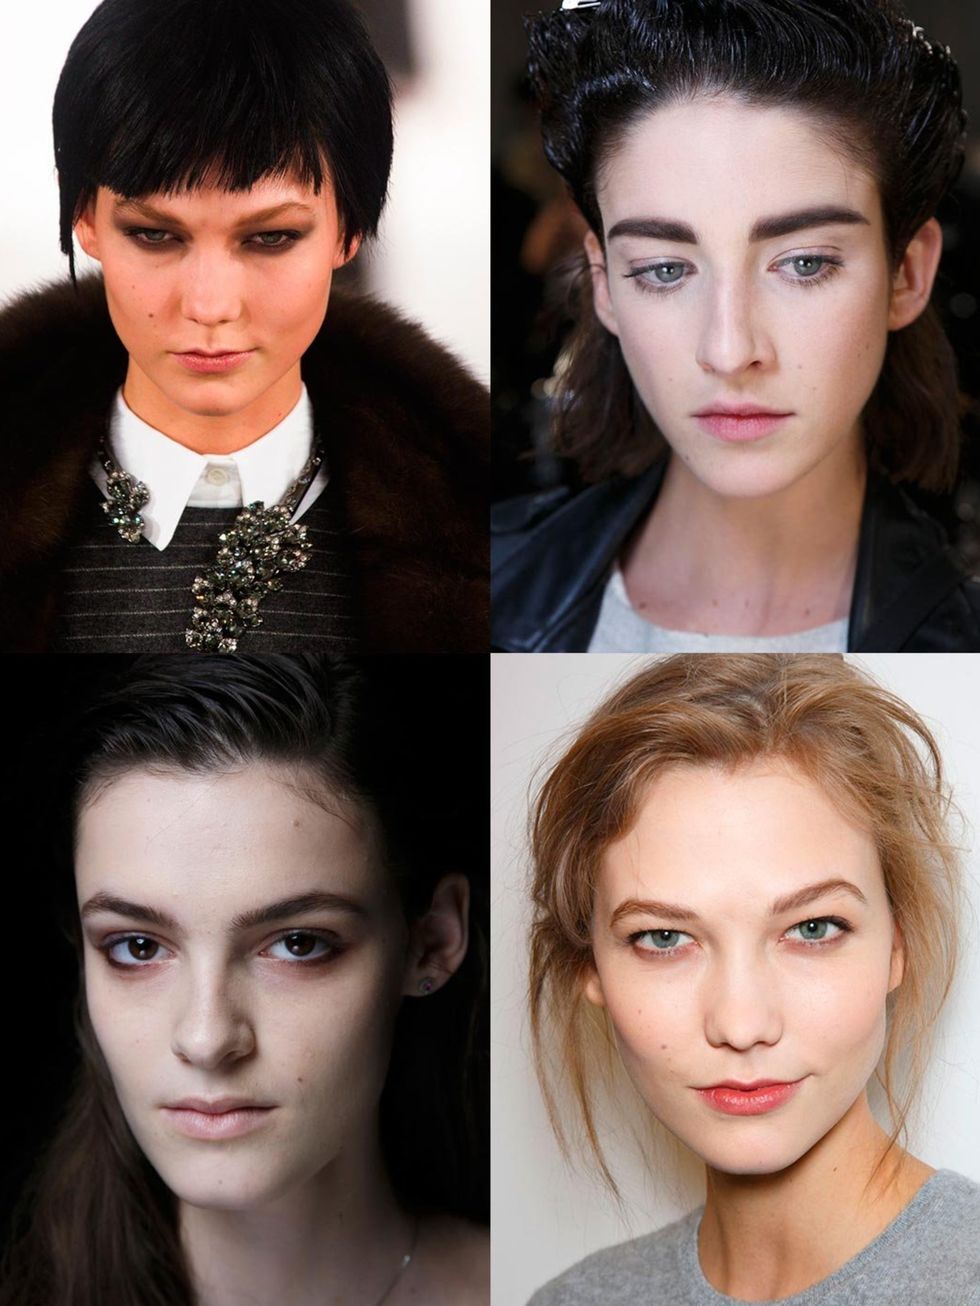 &lt;p&gt;We braved the freezing New York temperatures and even a blizzard to investigate the emerging beauty trends for next season. And, as usual, the Big Apple didn&rsquo;t disappoint.&lt;/p&gt;&lt;p&gt;Backstage we saw an eclectic mix of make-up looks,